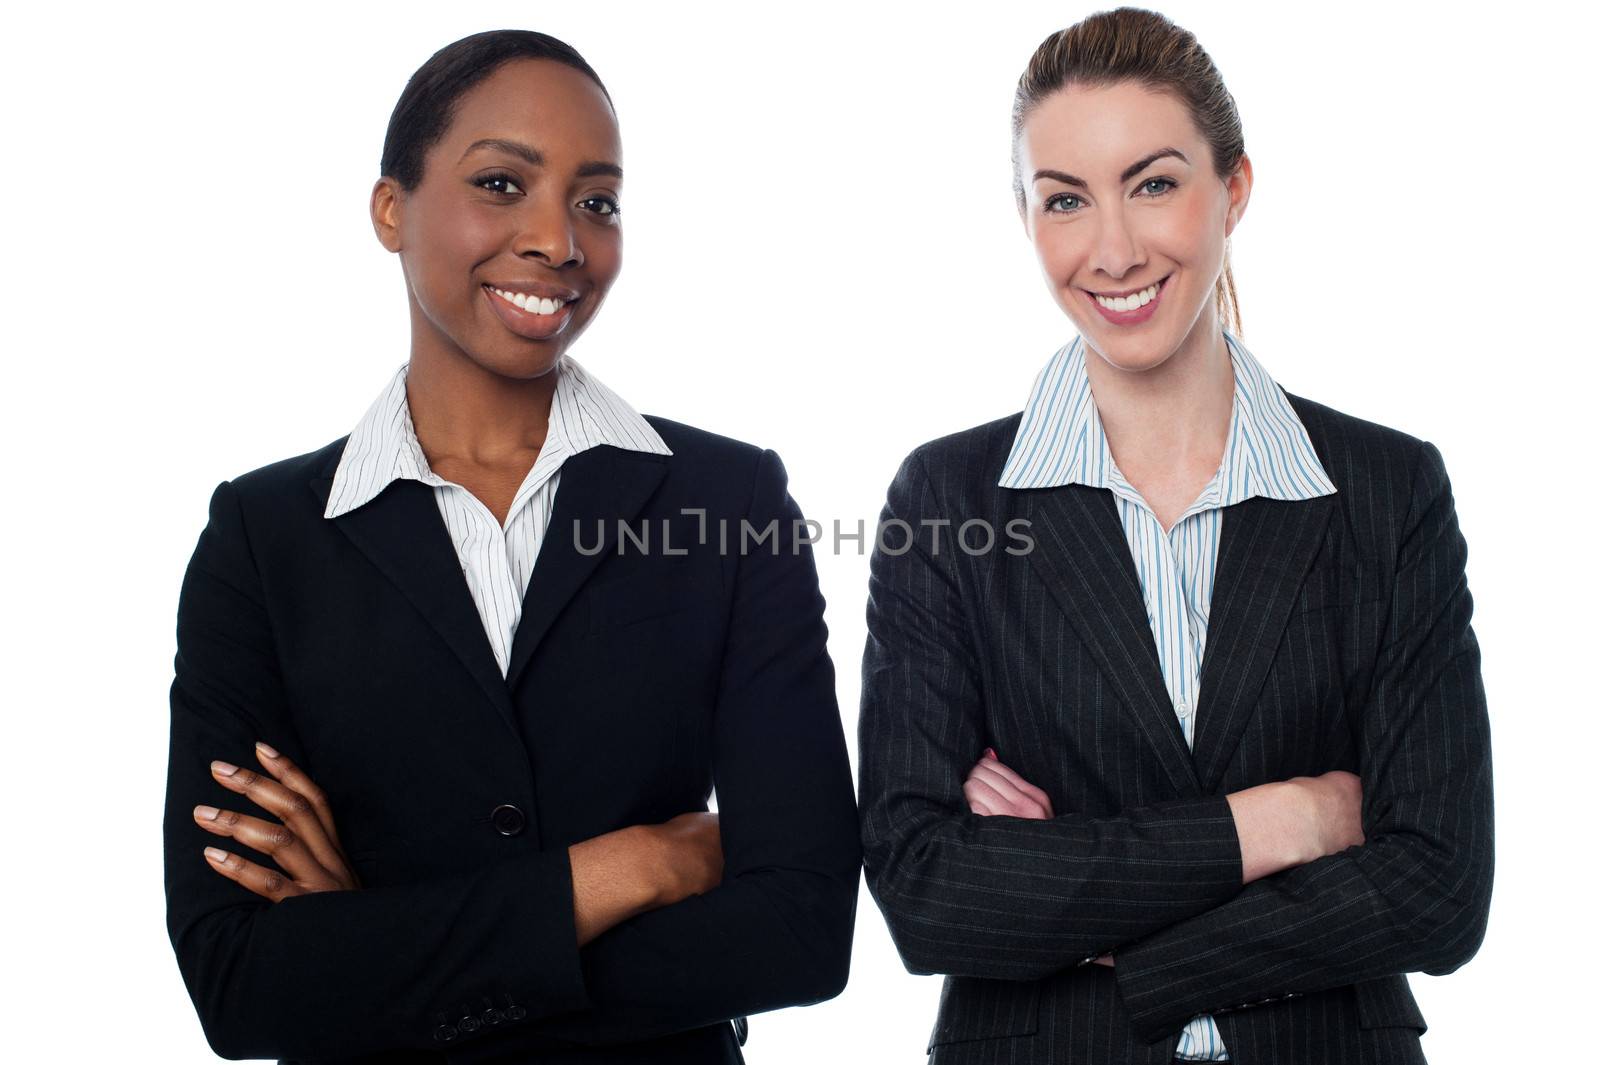 Smiling business women posing with confidence